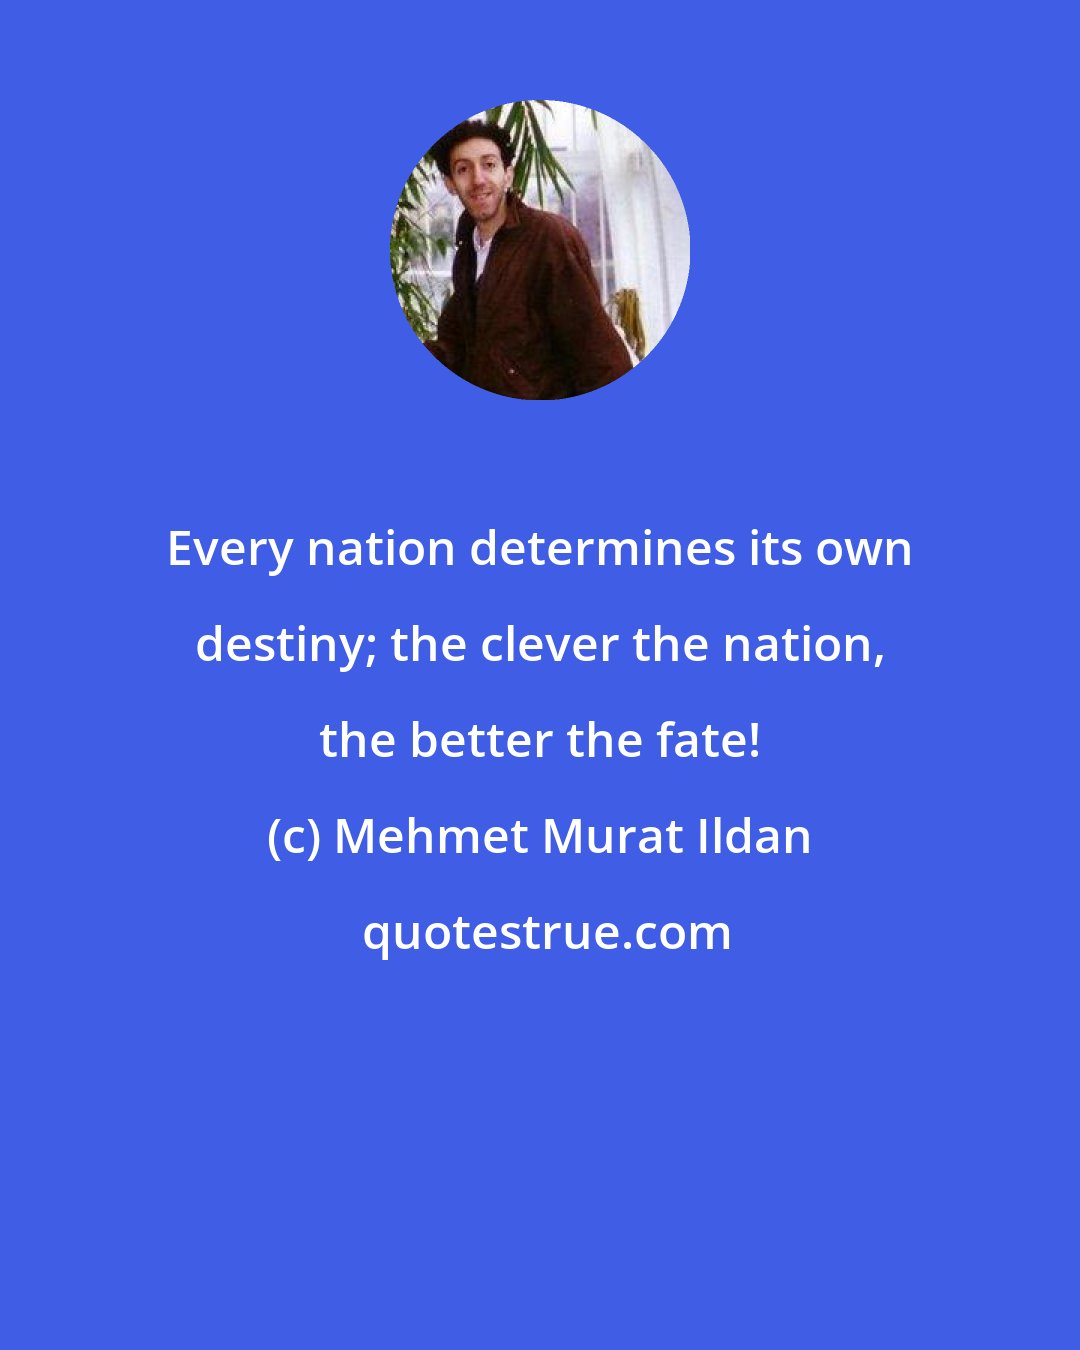 Mehmet Murat Ildan: Every nation determines its own destiny; the clever the nation, the better the fate!